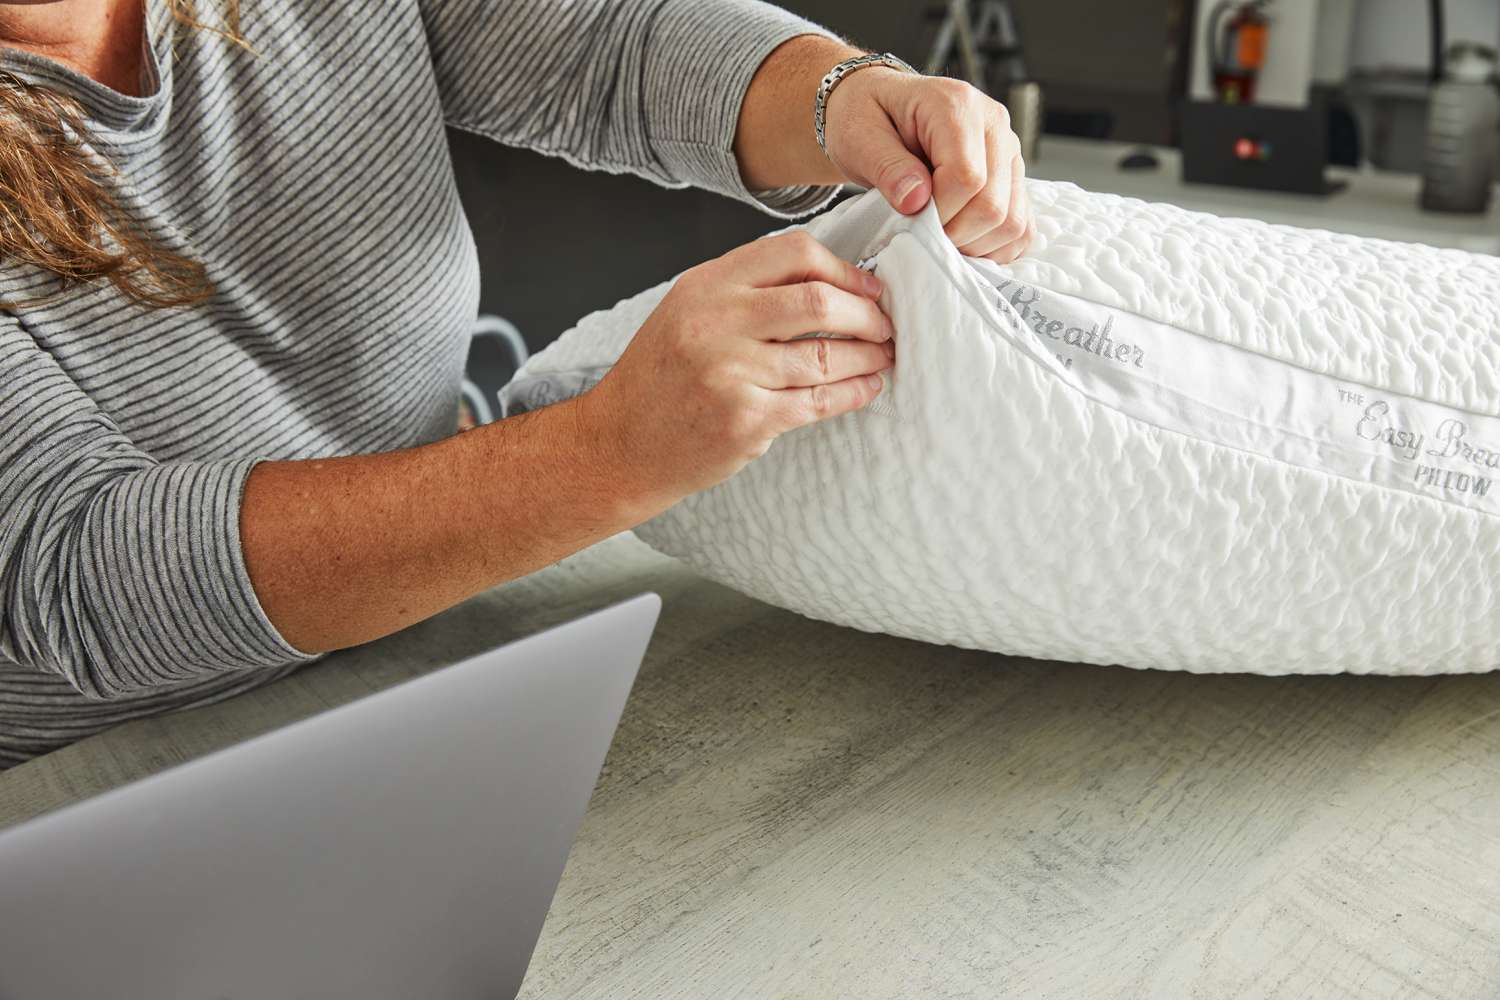 We Tested 51 Foam Pillows, And These 11 Are the Most Supportive and Comfortable